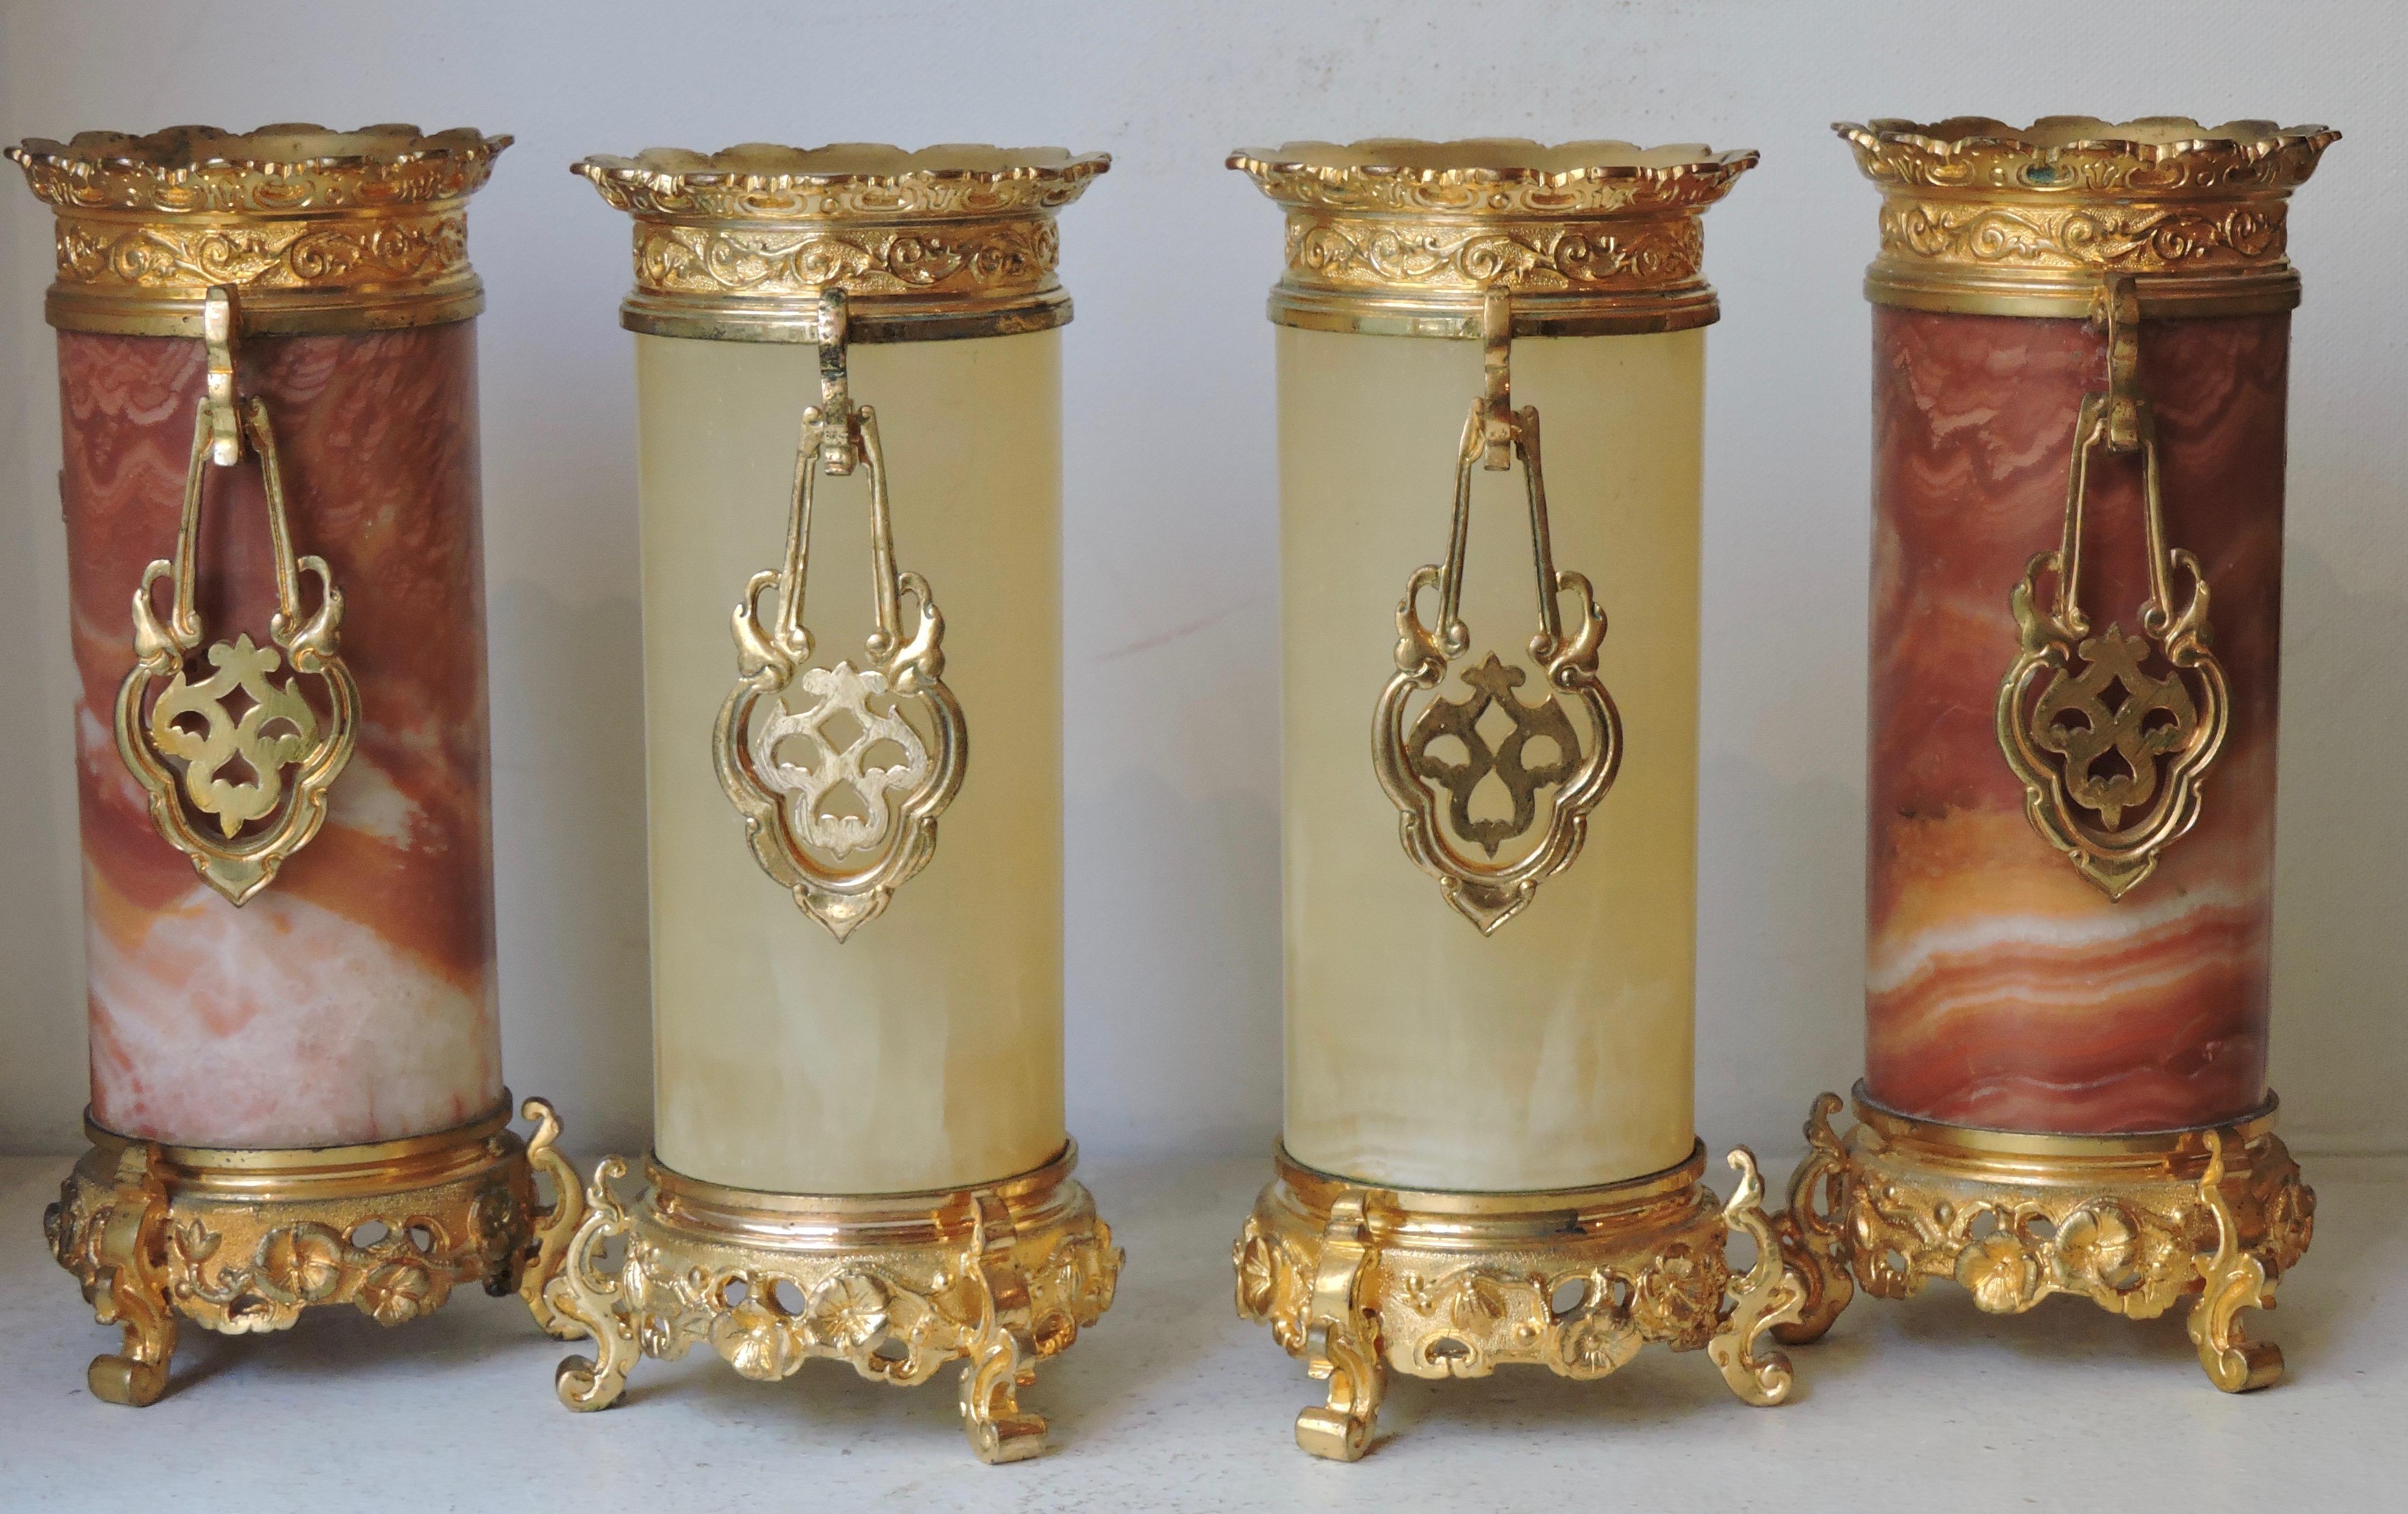 Gilt Set of 4 Japonisme Marble, Onyx and Ormolu Vases in the Style of Edouard Lièvre